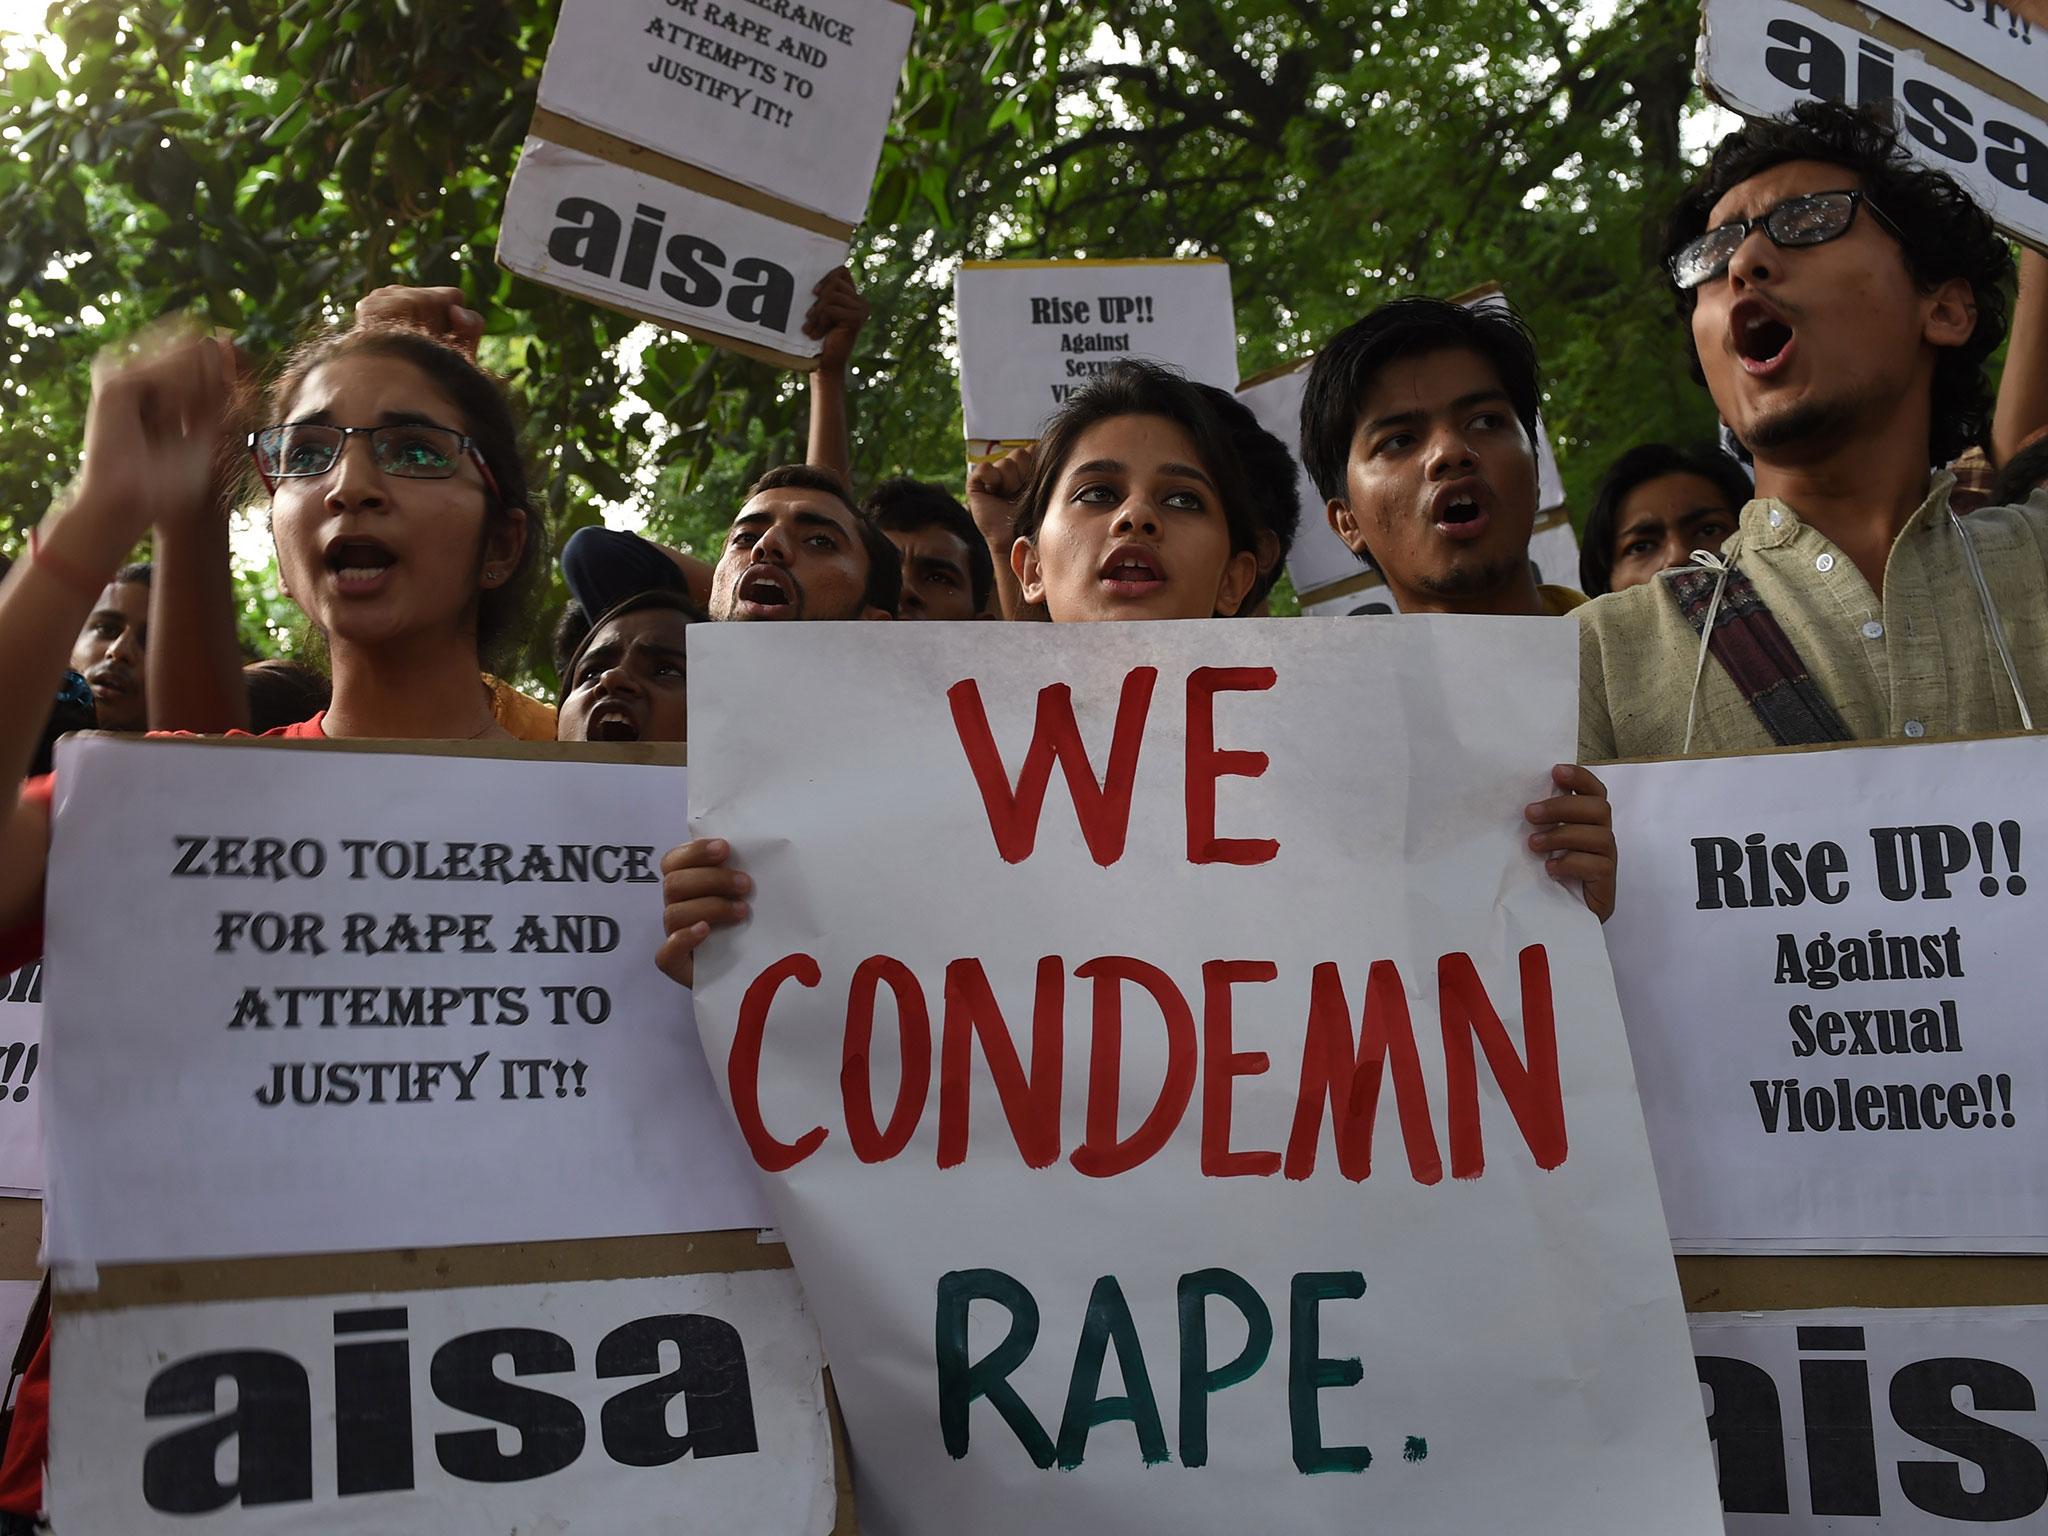 Gang rape' of student prompts arrests after video causes outcry in India |  The Independent | The Independent